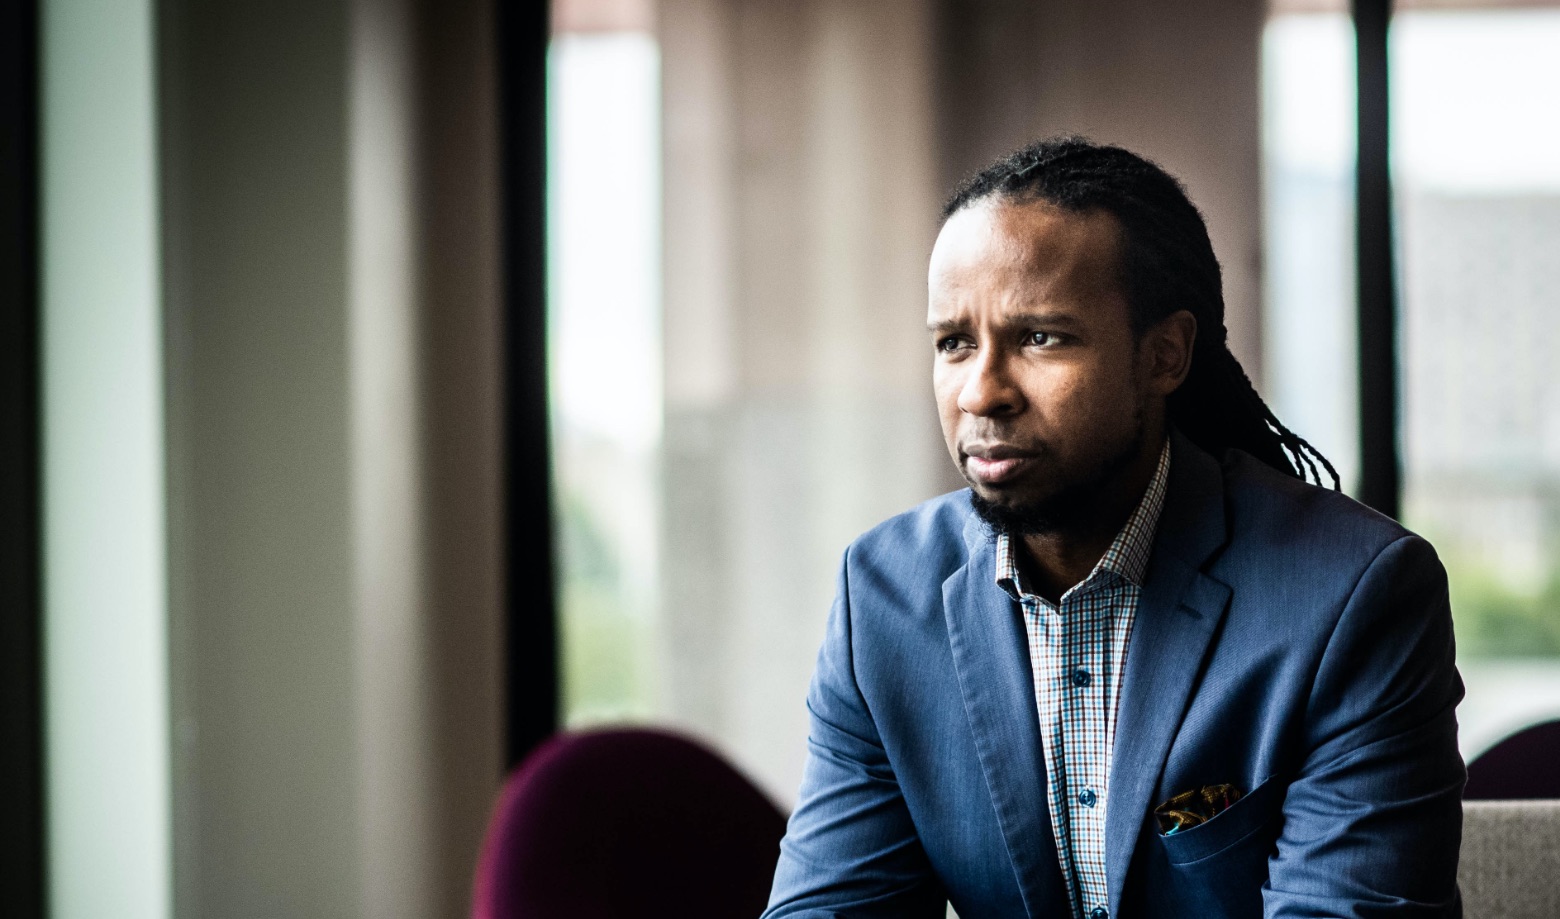 Photo of Ibram X. Kendi sitting in a blue suit looking out a window.